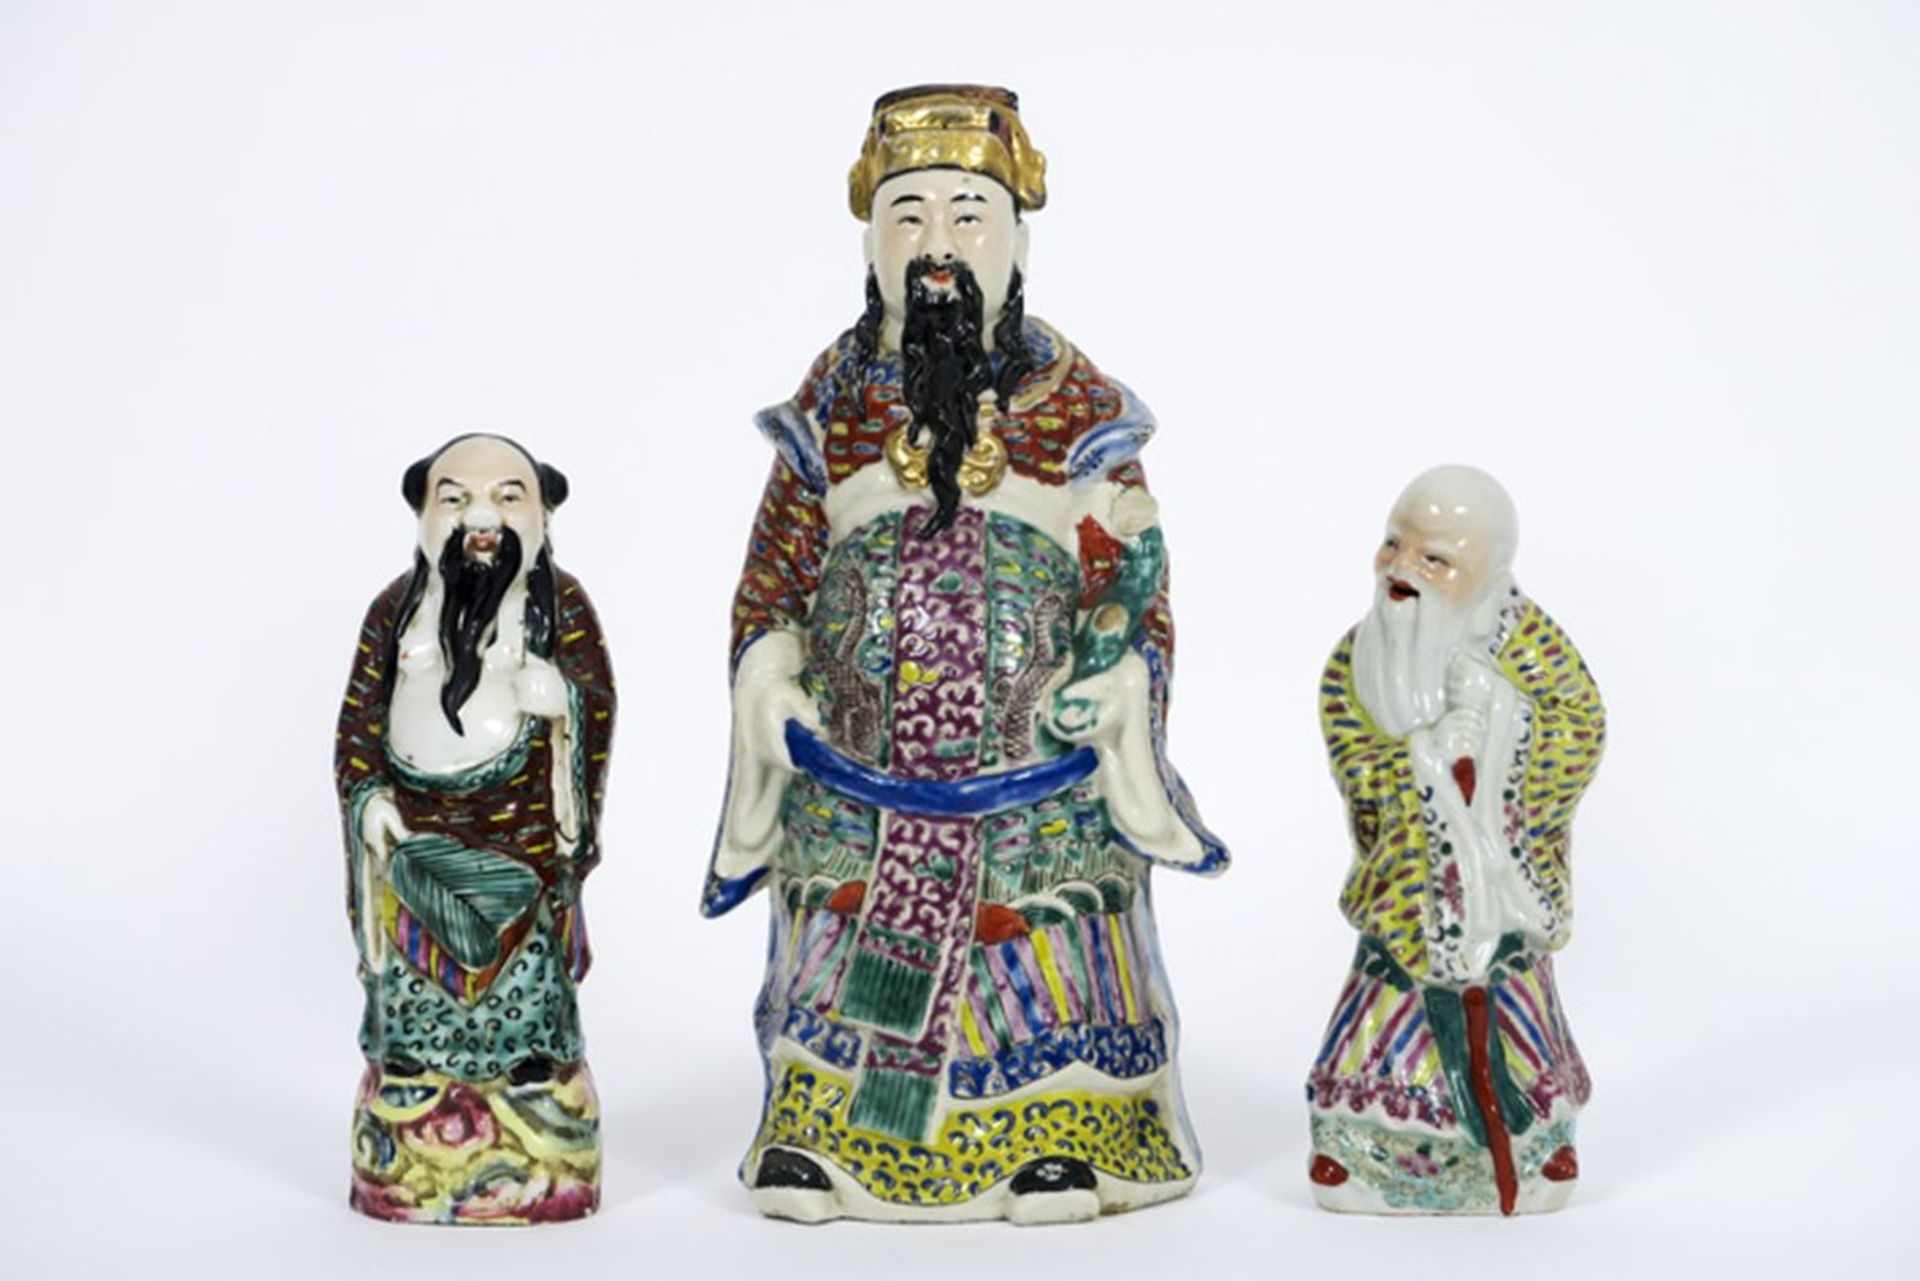 three Chinese "Sage" sculptures in porcelain with polychrome decor - - Lot van [...]